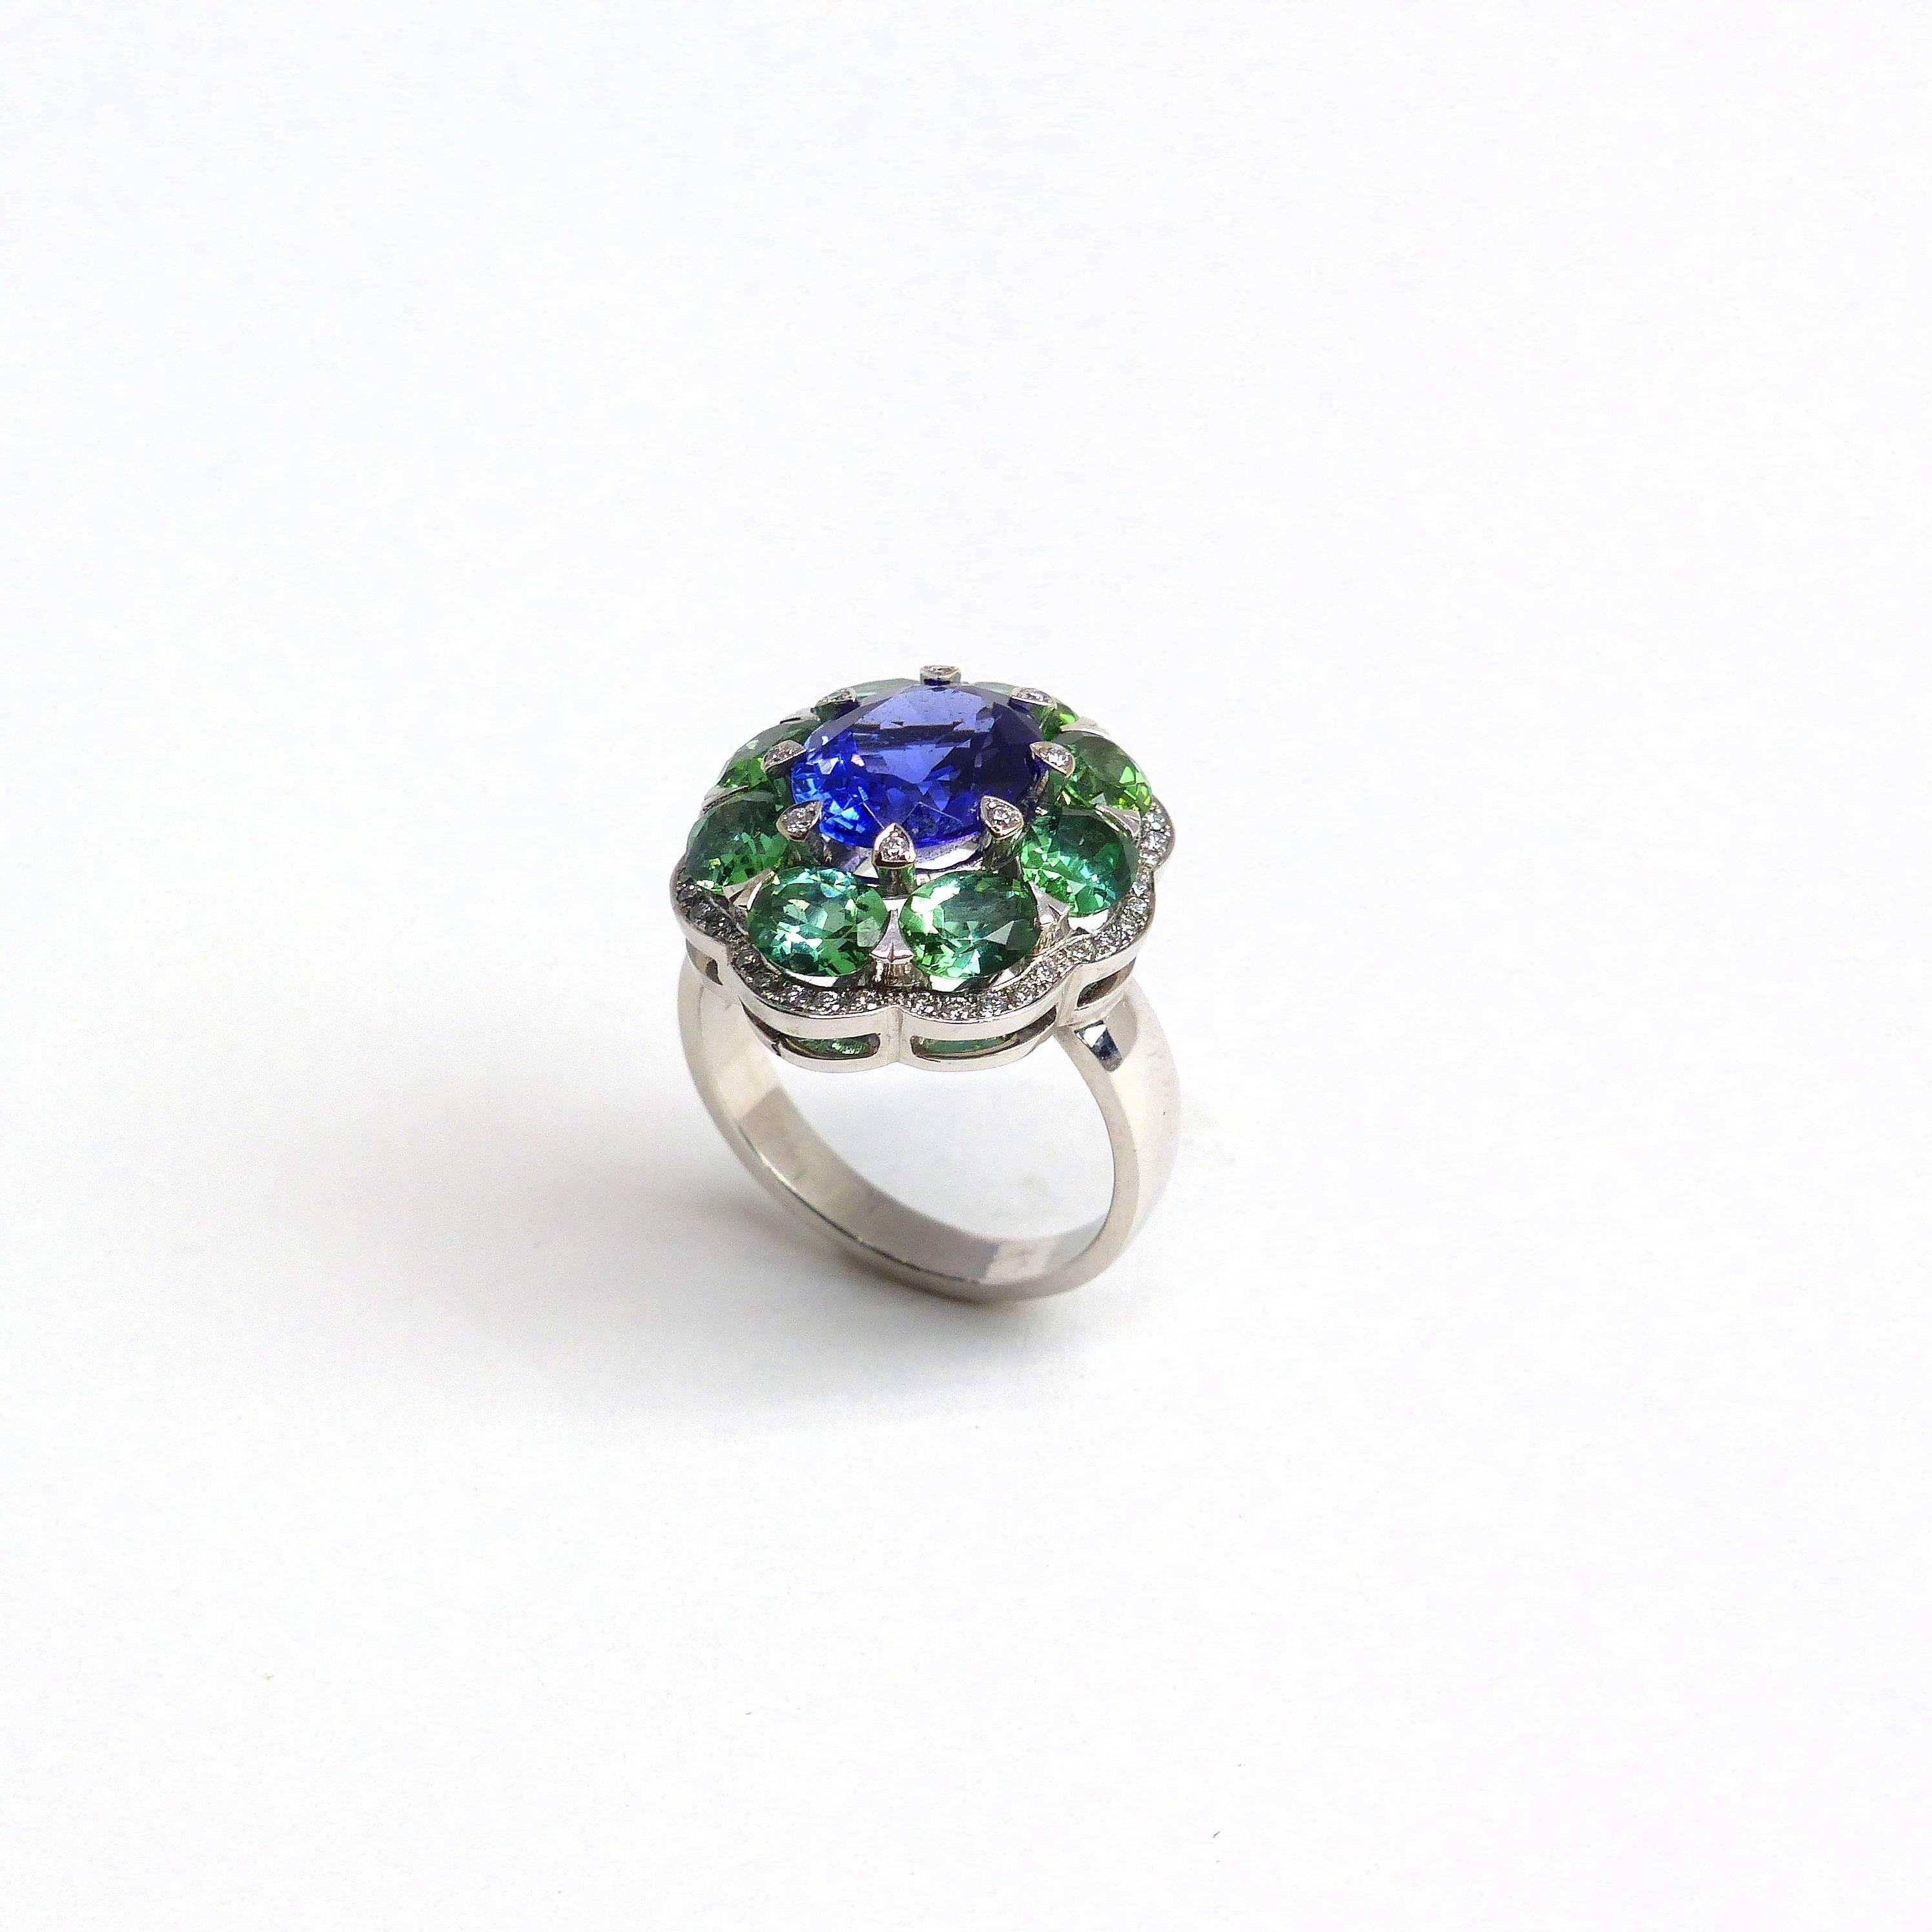 Thomas Leyser is renowned for his contemporary jewellery designs utilizing fine gemstones. 

This 18k white gold (9.33g) ring is set with 1x fine Tansanite (facetted, oval 10x8mm, 2.90ct) + 8x fine Tourmalines (oval, 5x4mm, 2.71ct) + 48x Diamonds